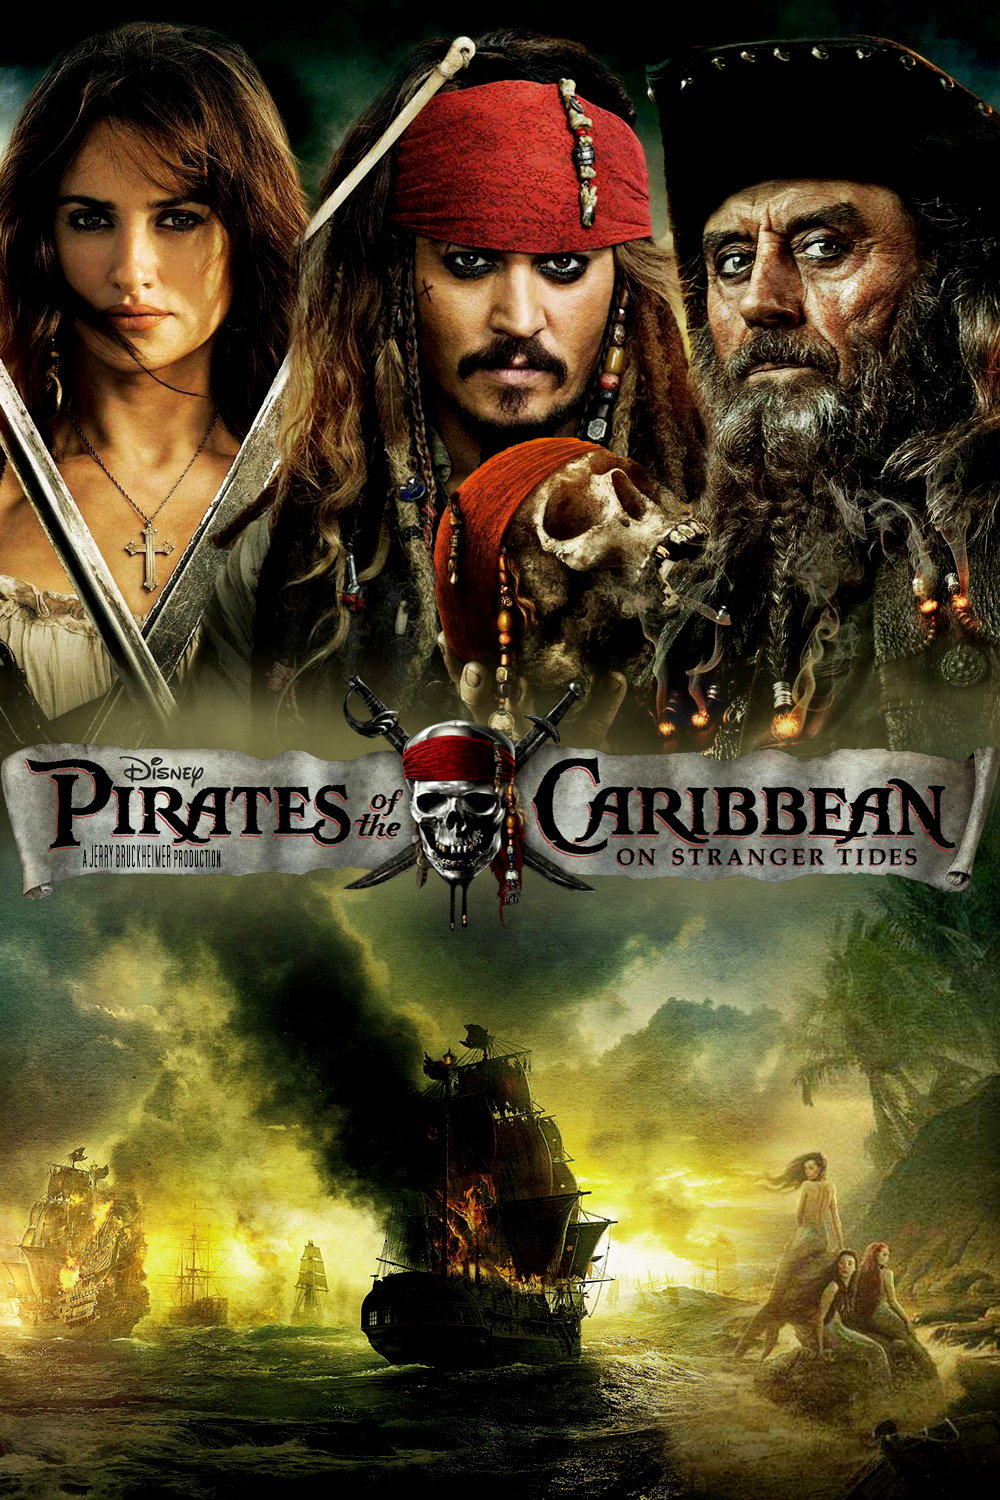 Pirates Of The Caribbean 4 Movie Poster - HD Wallpaper 